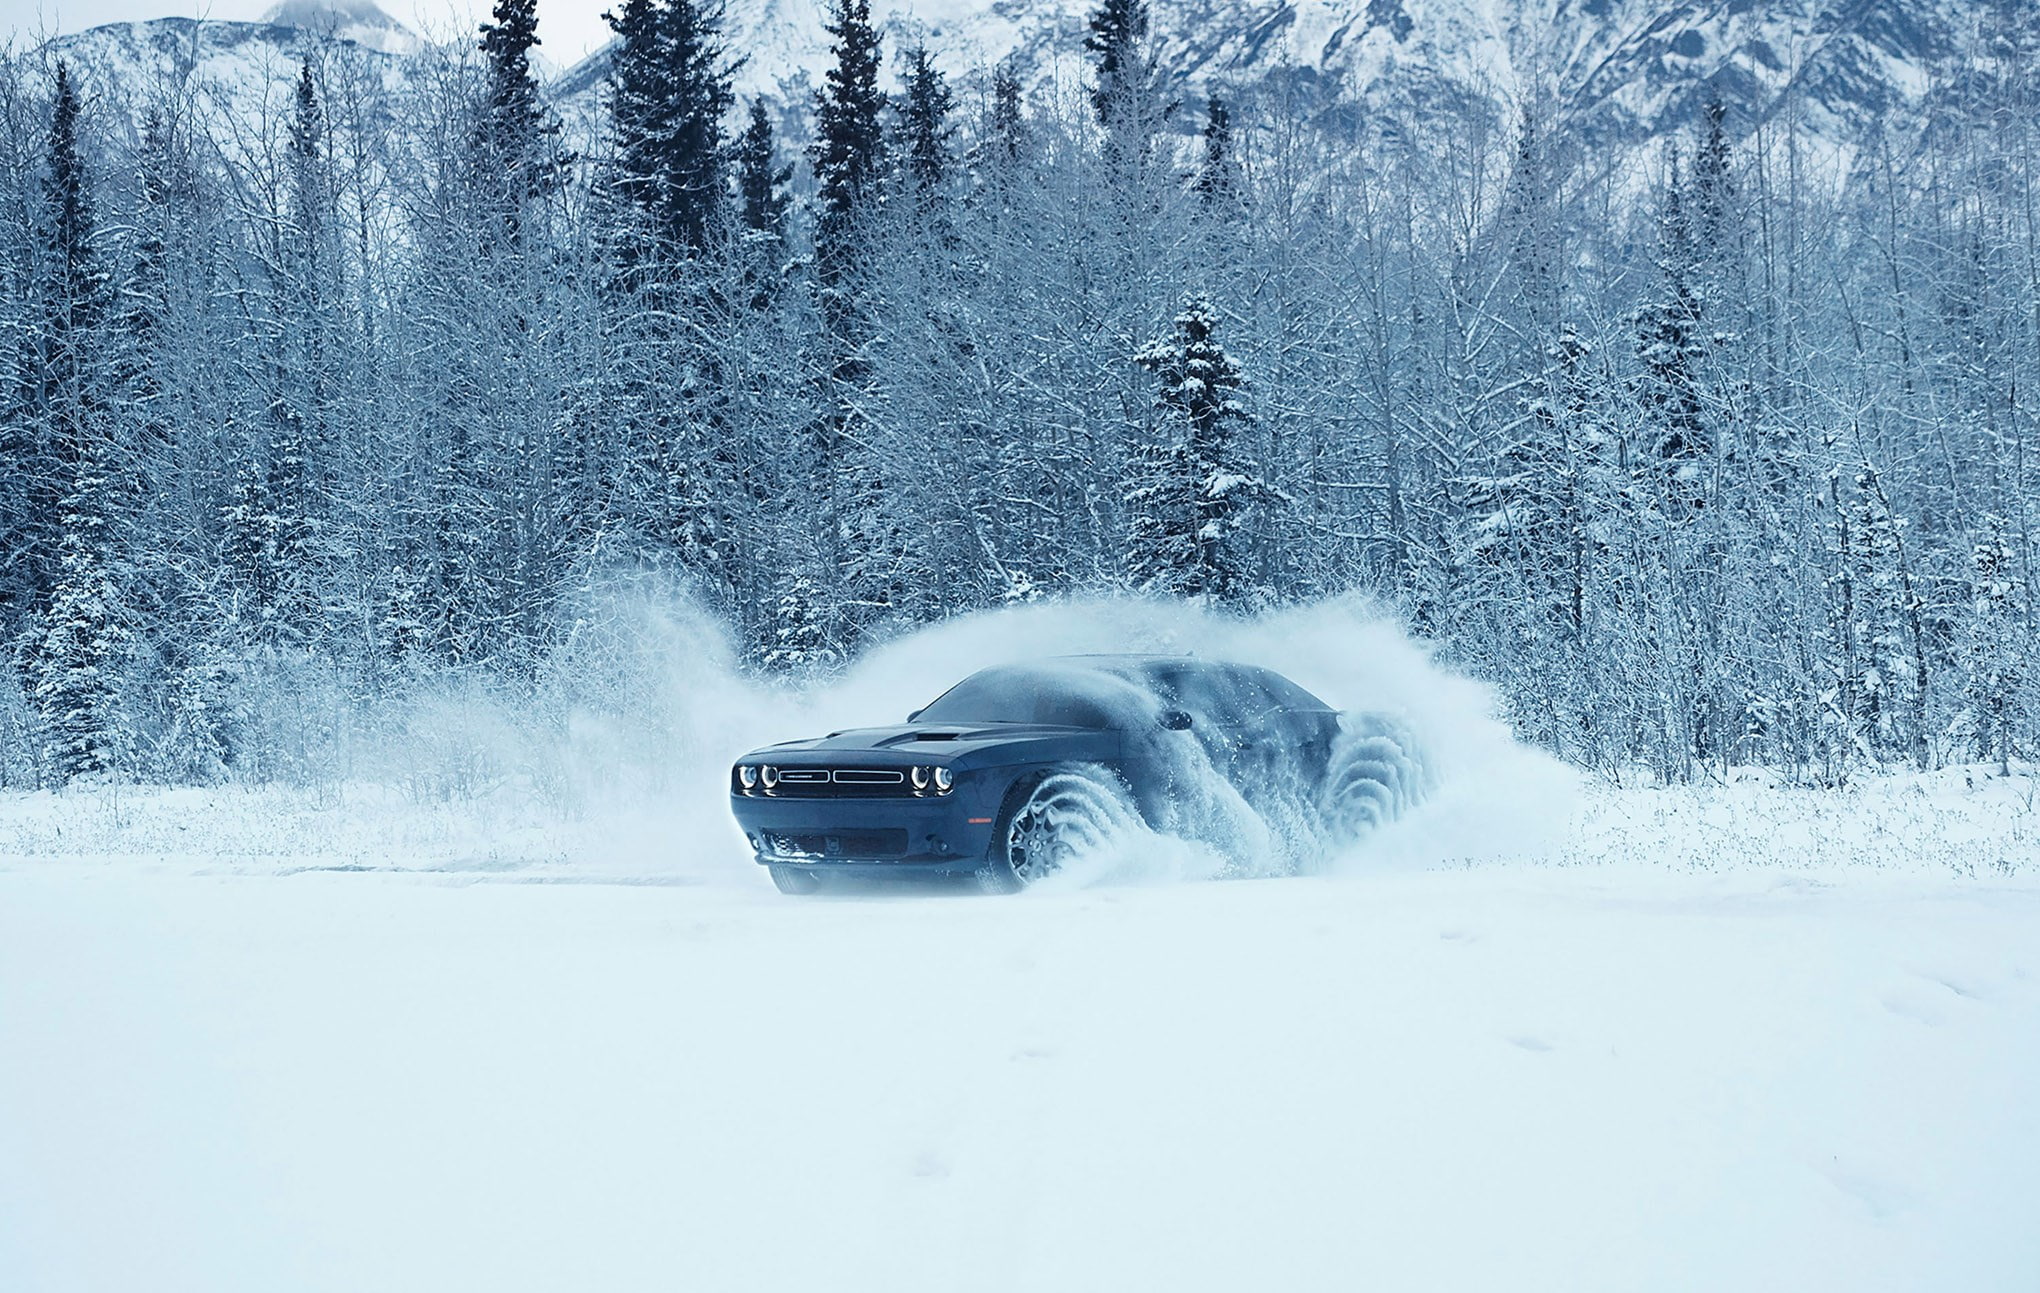 dodge challenger gt awd, snow, winter, cold temperature, mode of transportation